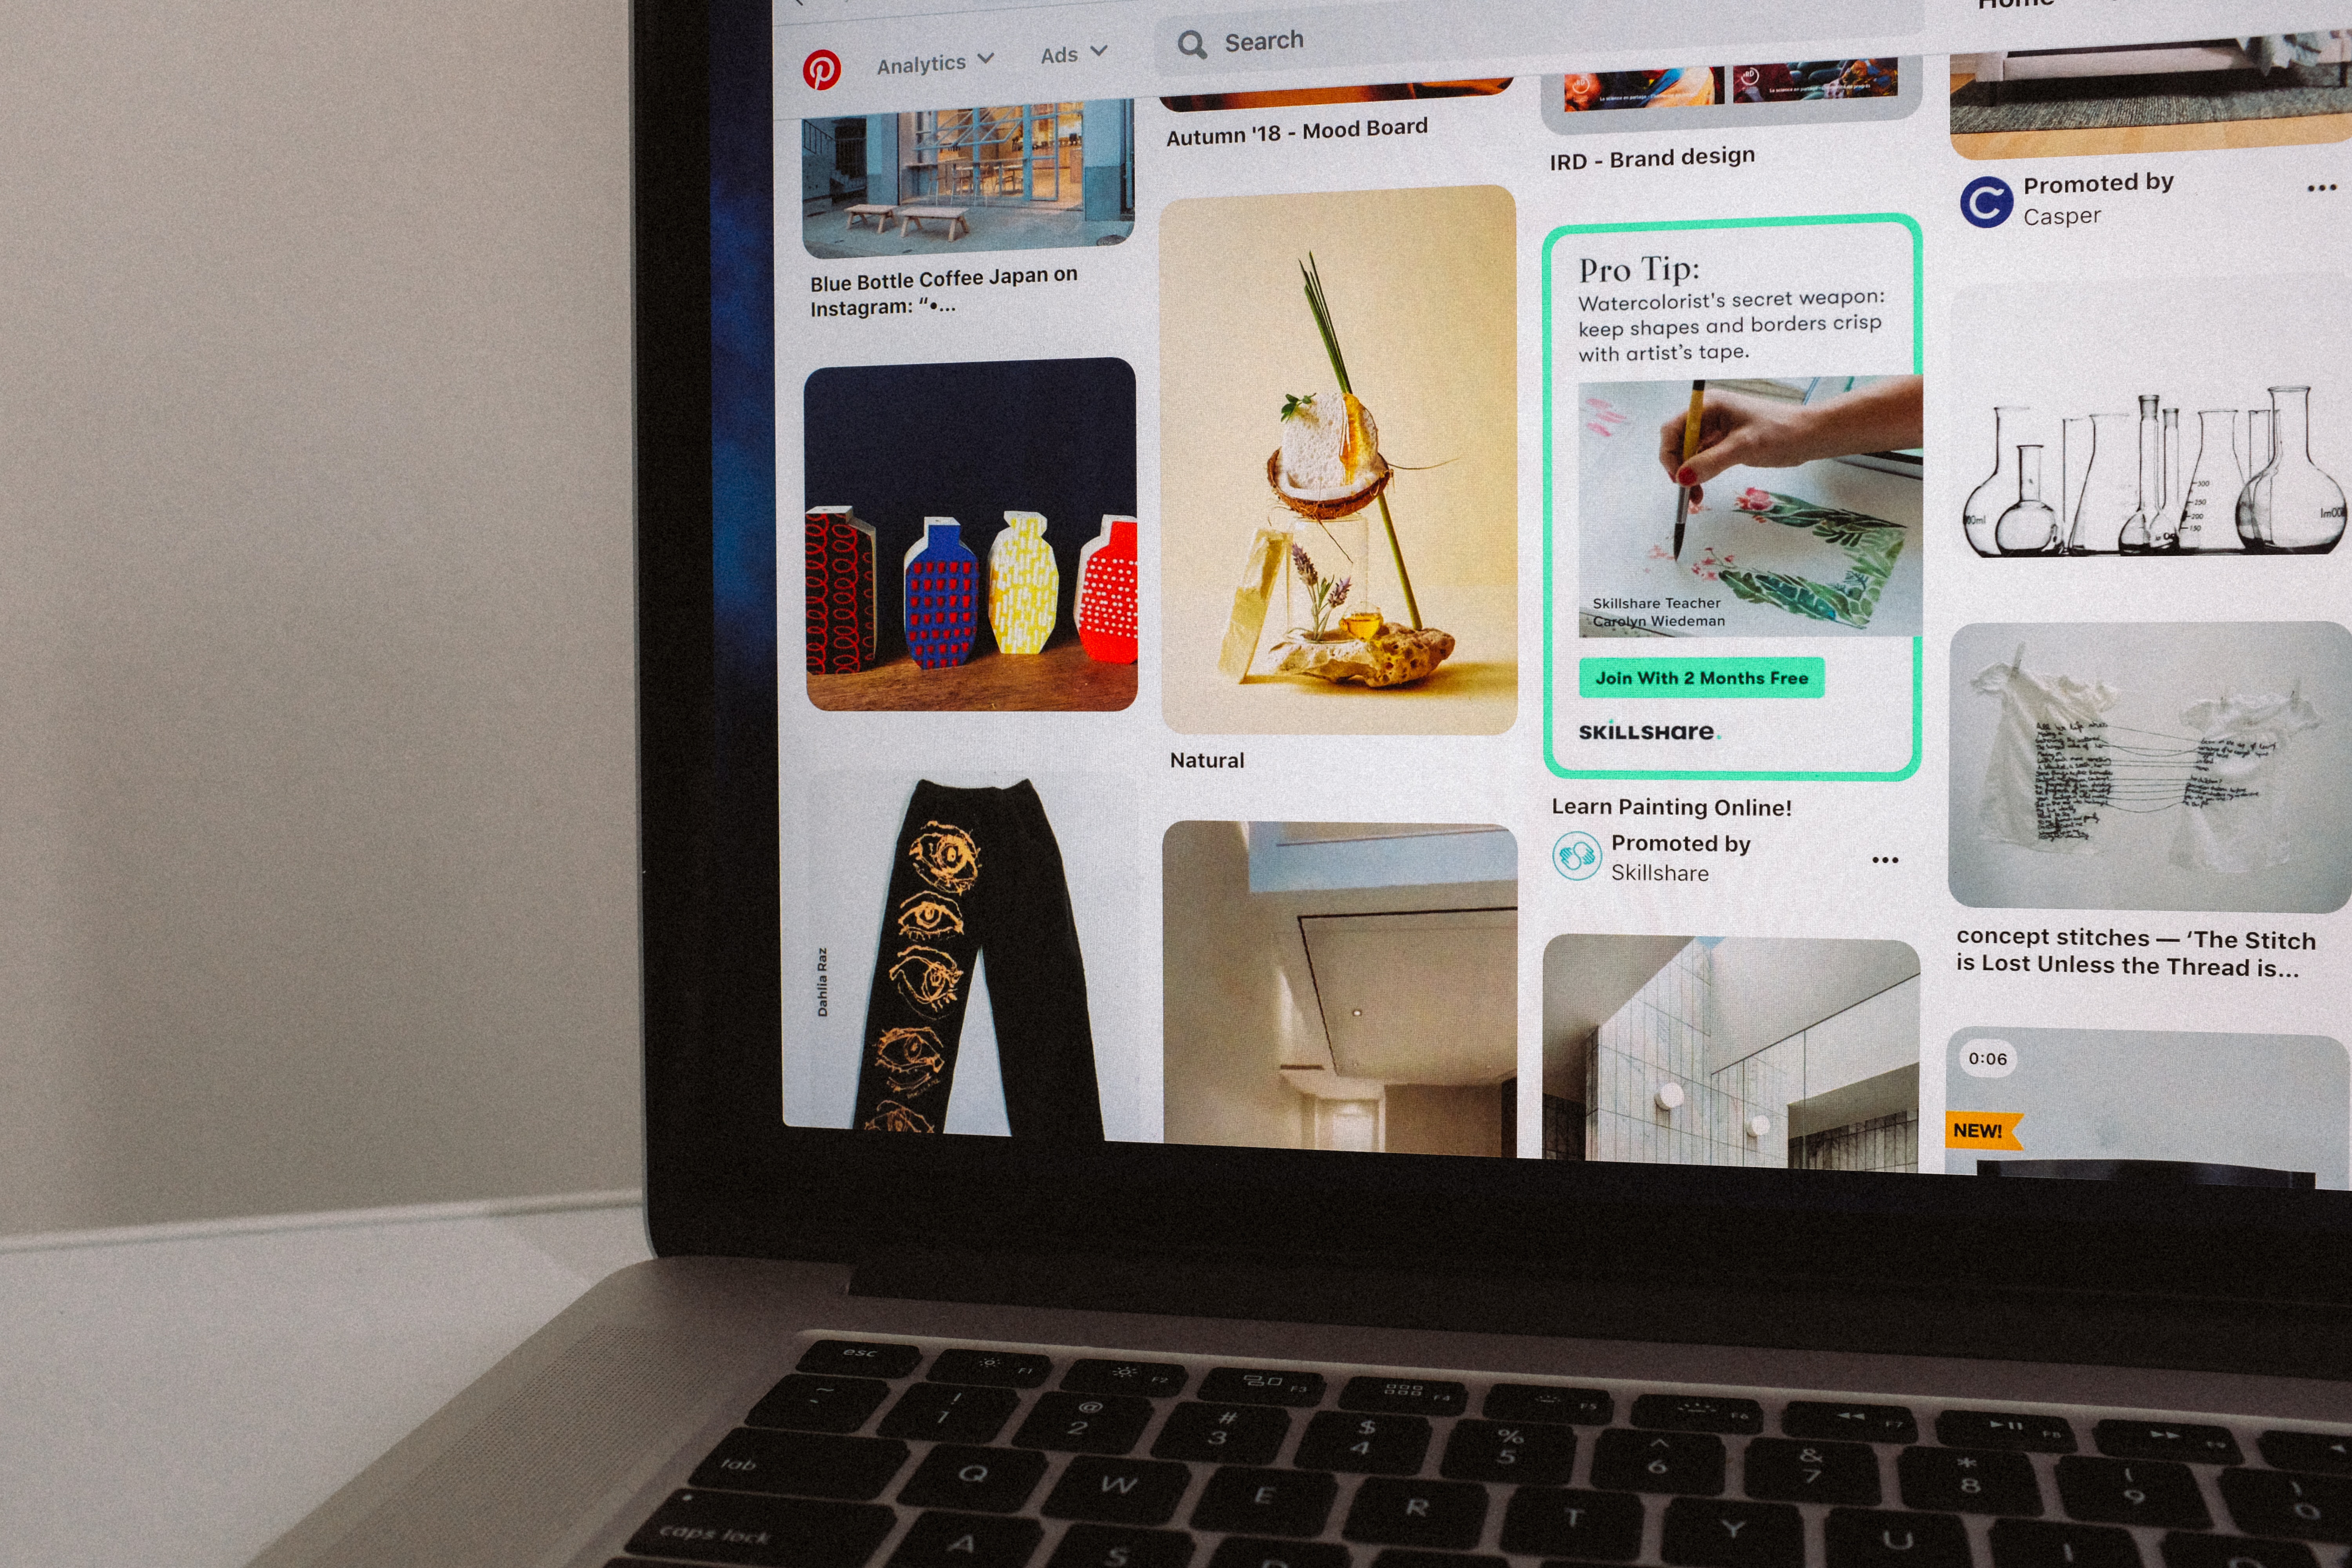 How To Add A Pinterest Tab To Your Facebook Page